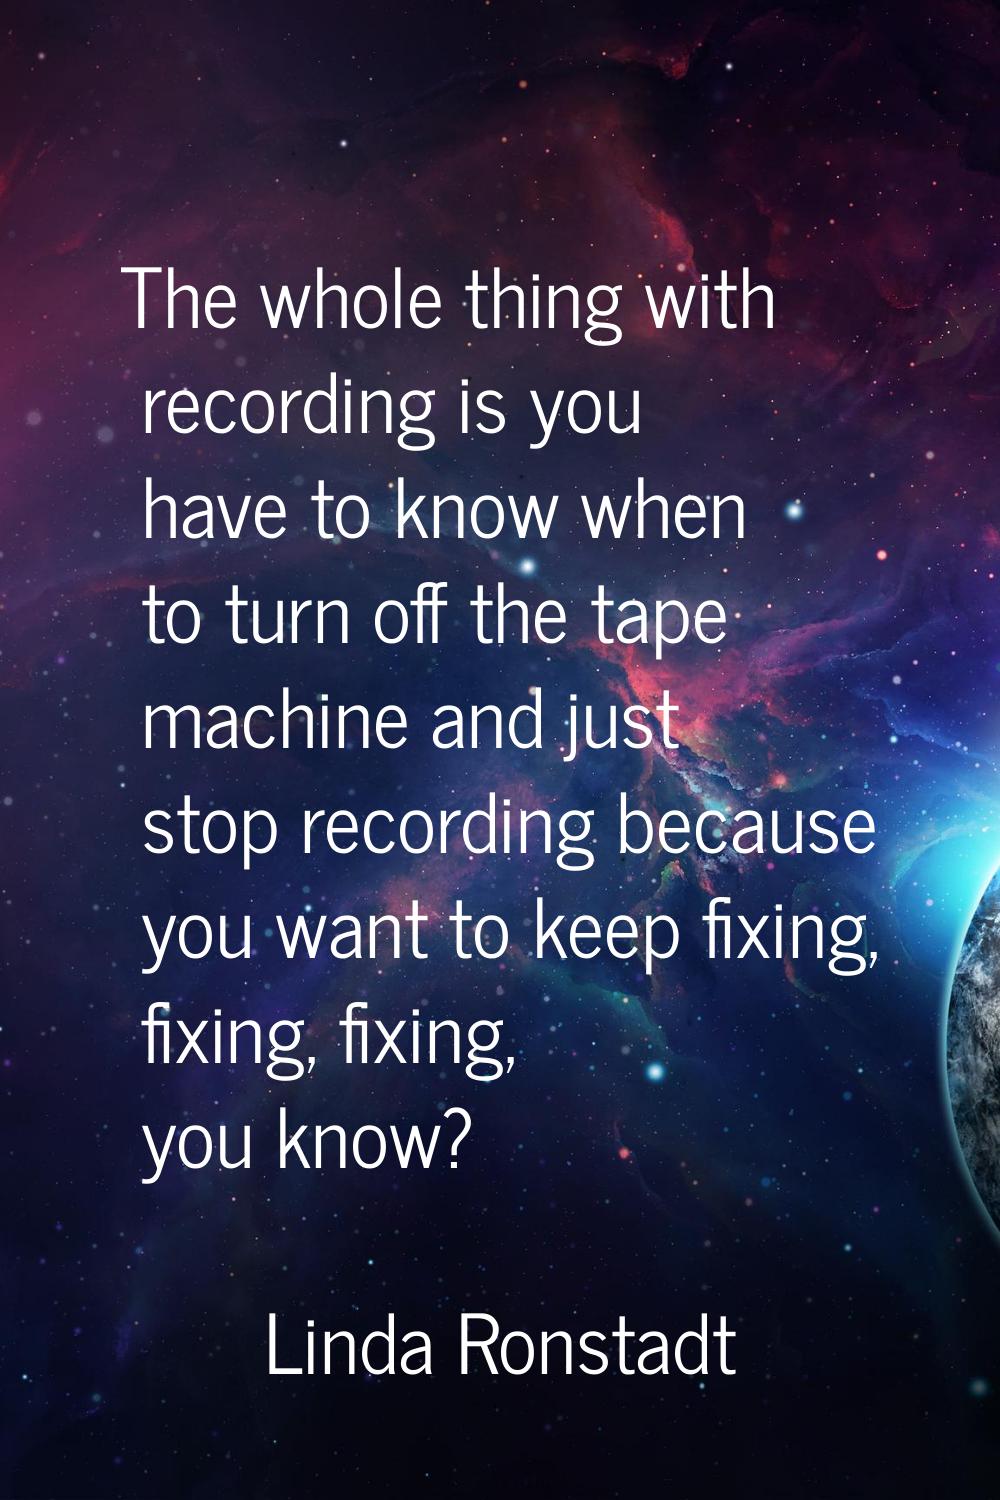 The whole thing with recording is you have to know when to turn off the tape machine and just stop 